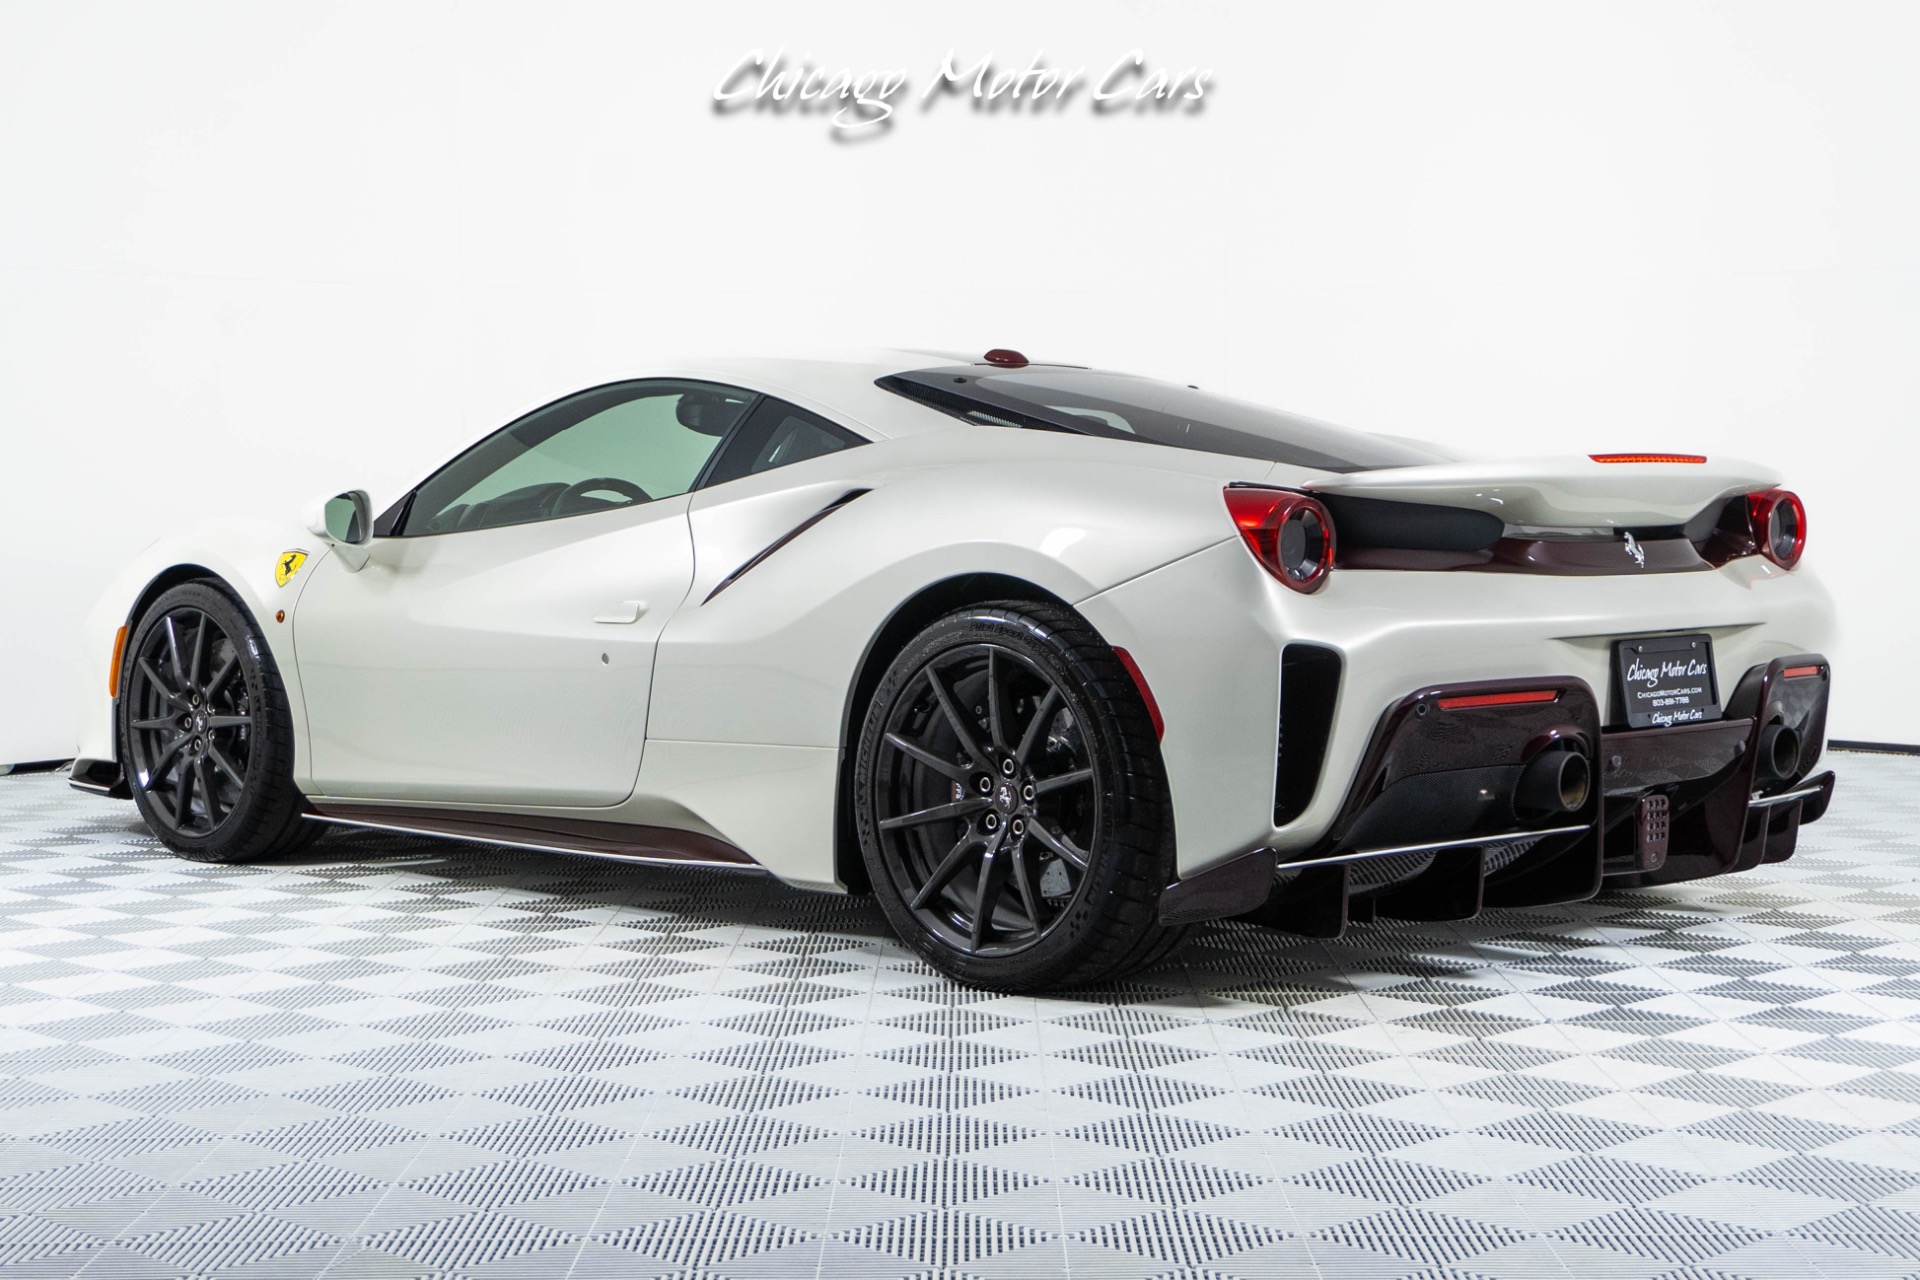 Used-2020-Ferrari-488-Pista-Tailor-Made-Huge-MSRP-Incredible-Spec-Loaded-with-Red-Carbon-Fiber